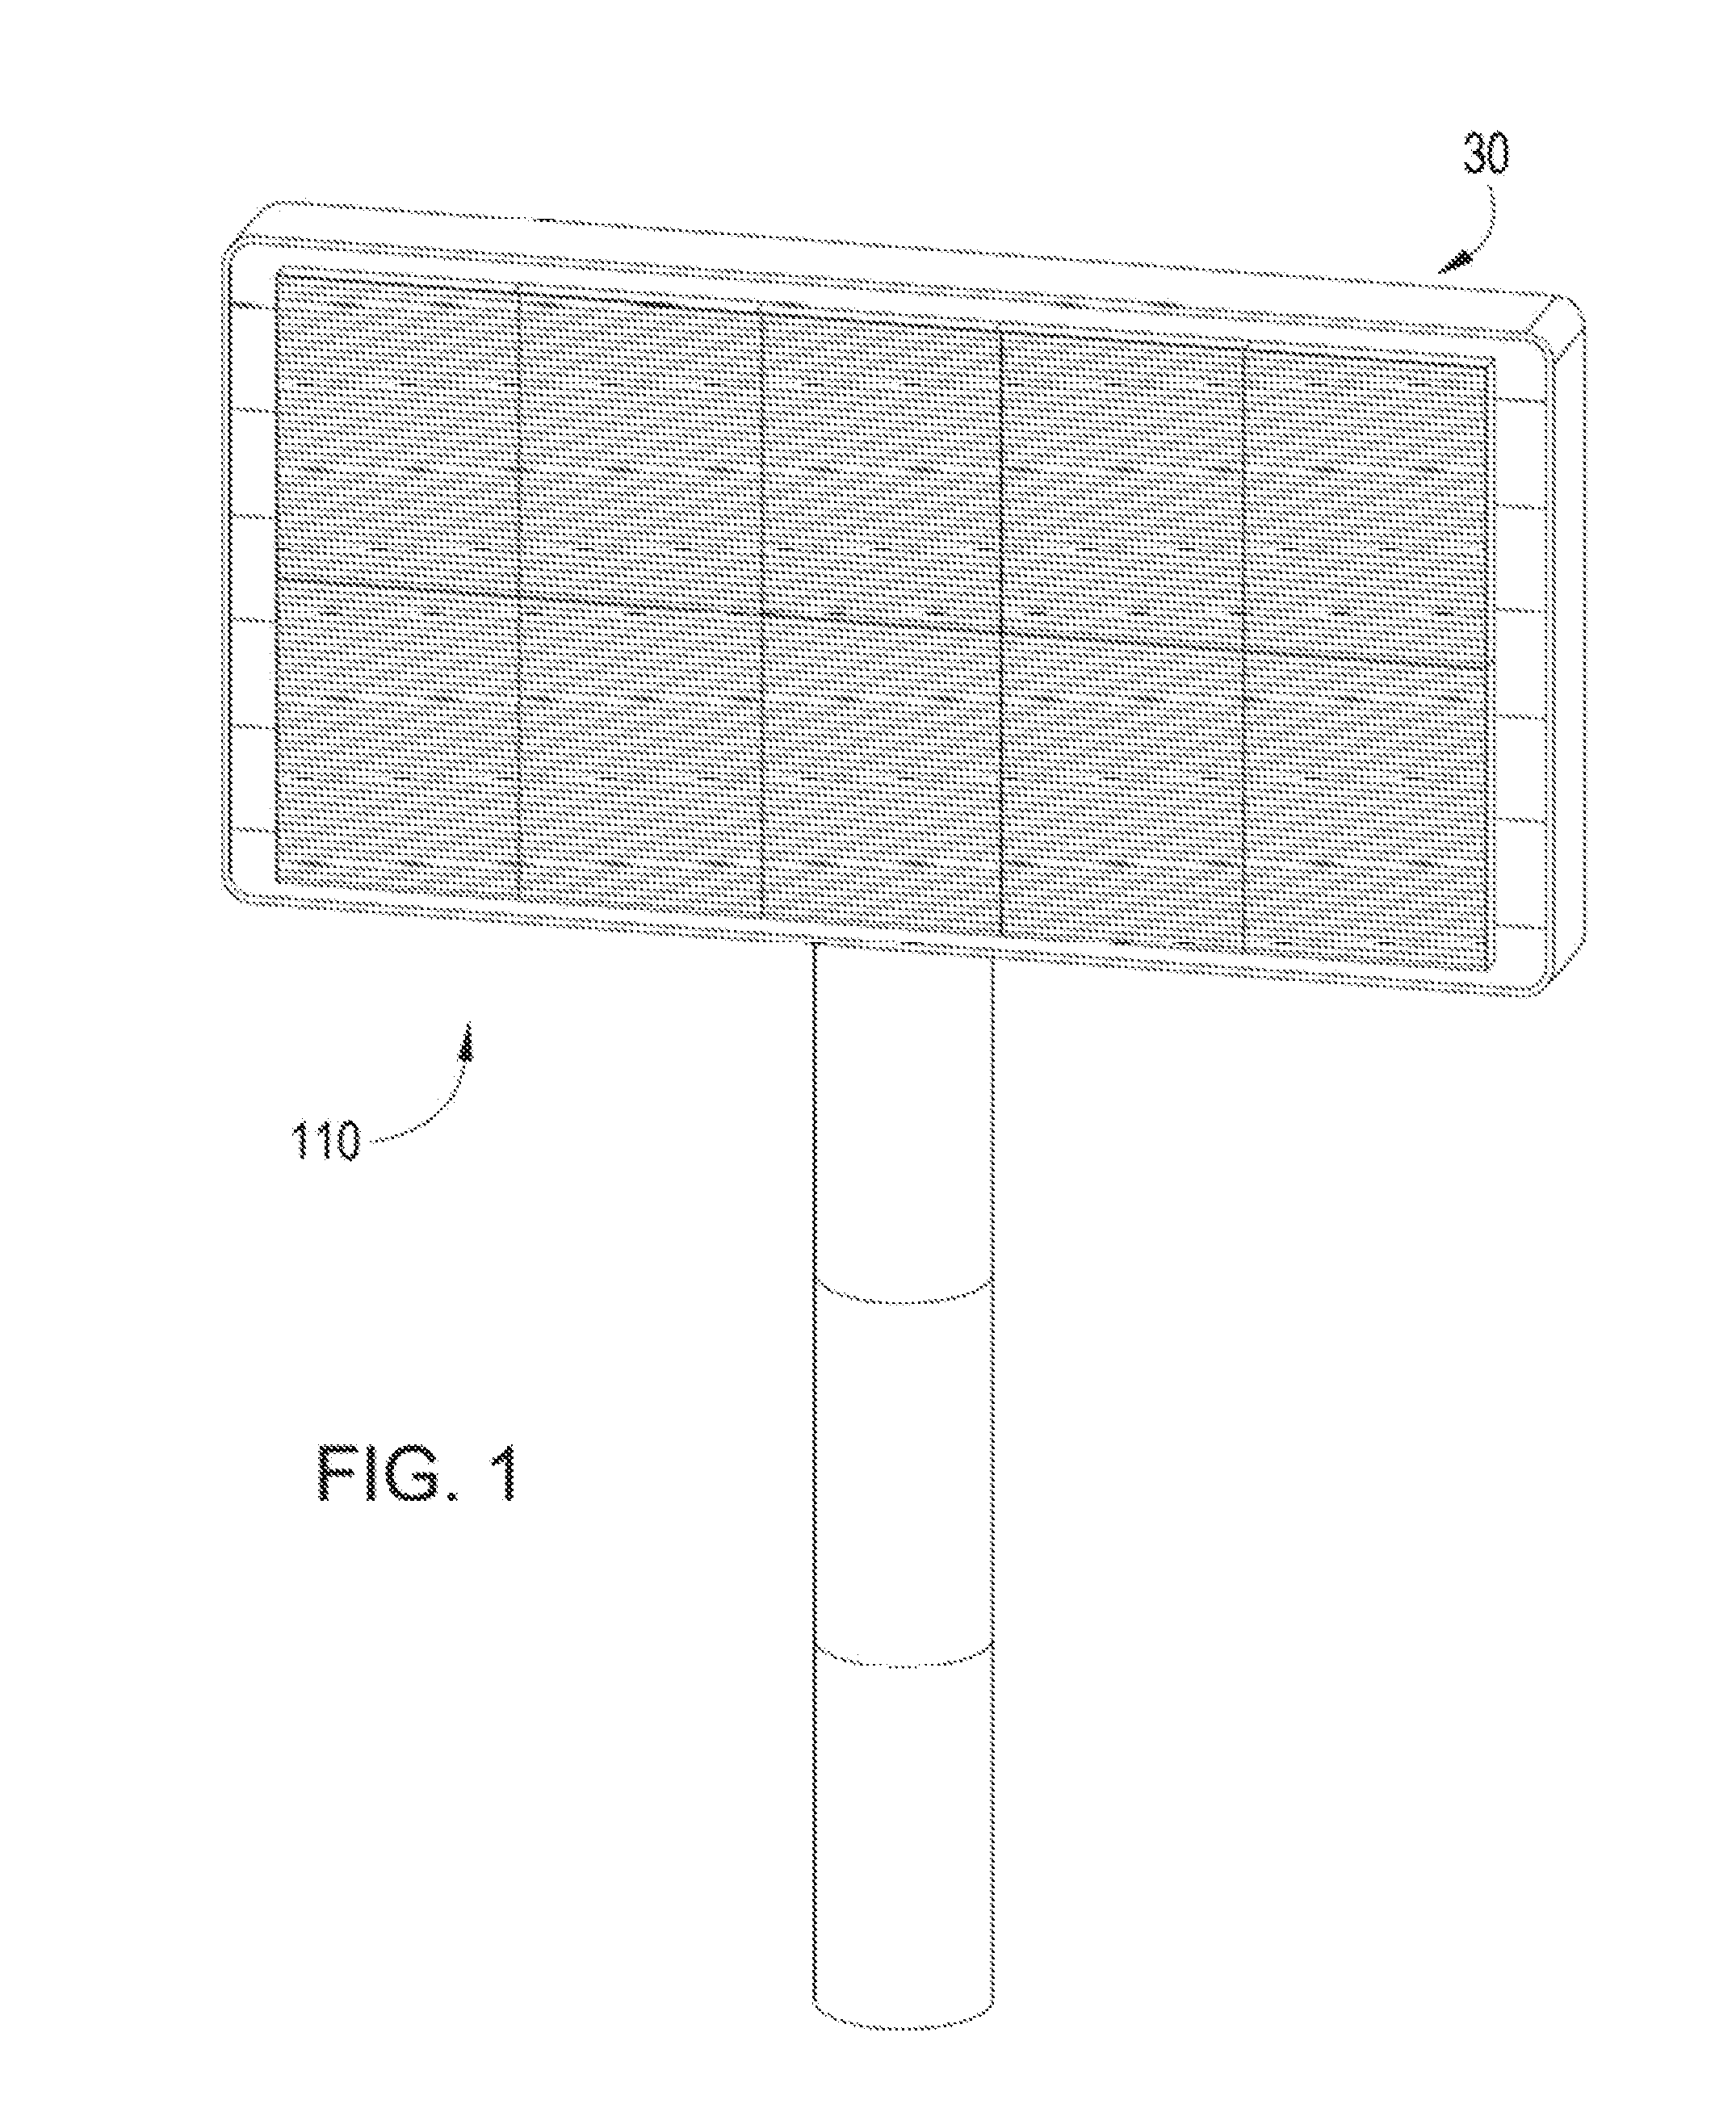 Modular wire harness arrangements and methods of using same for backside to frontside power and data distribution safety schemes